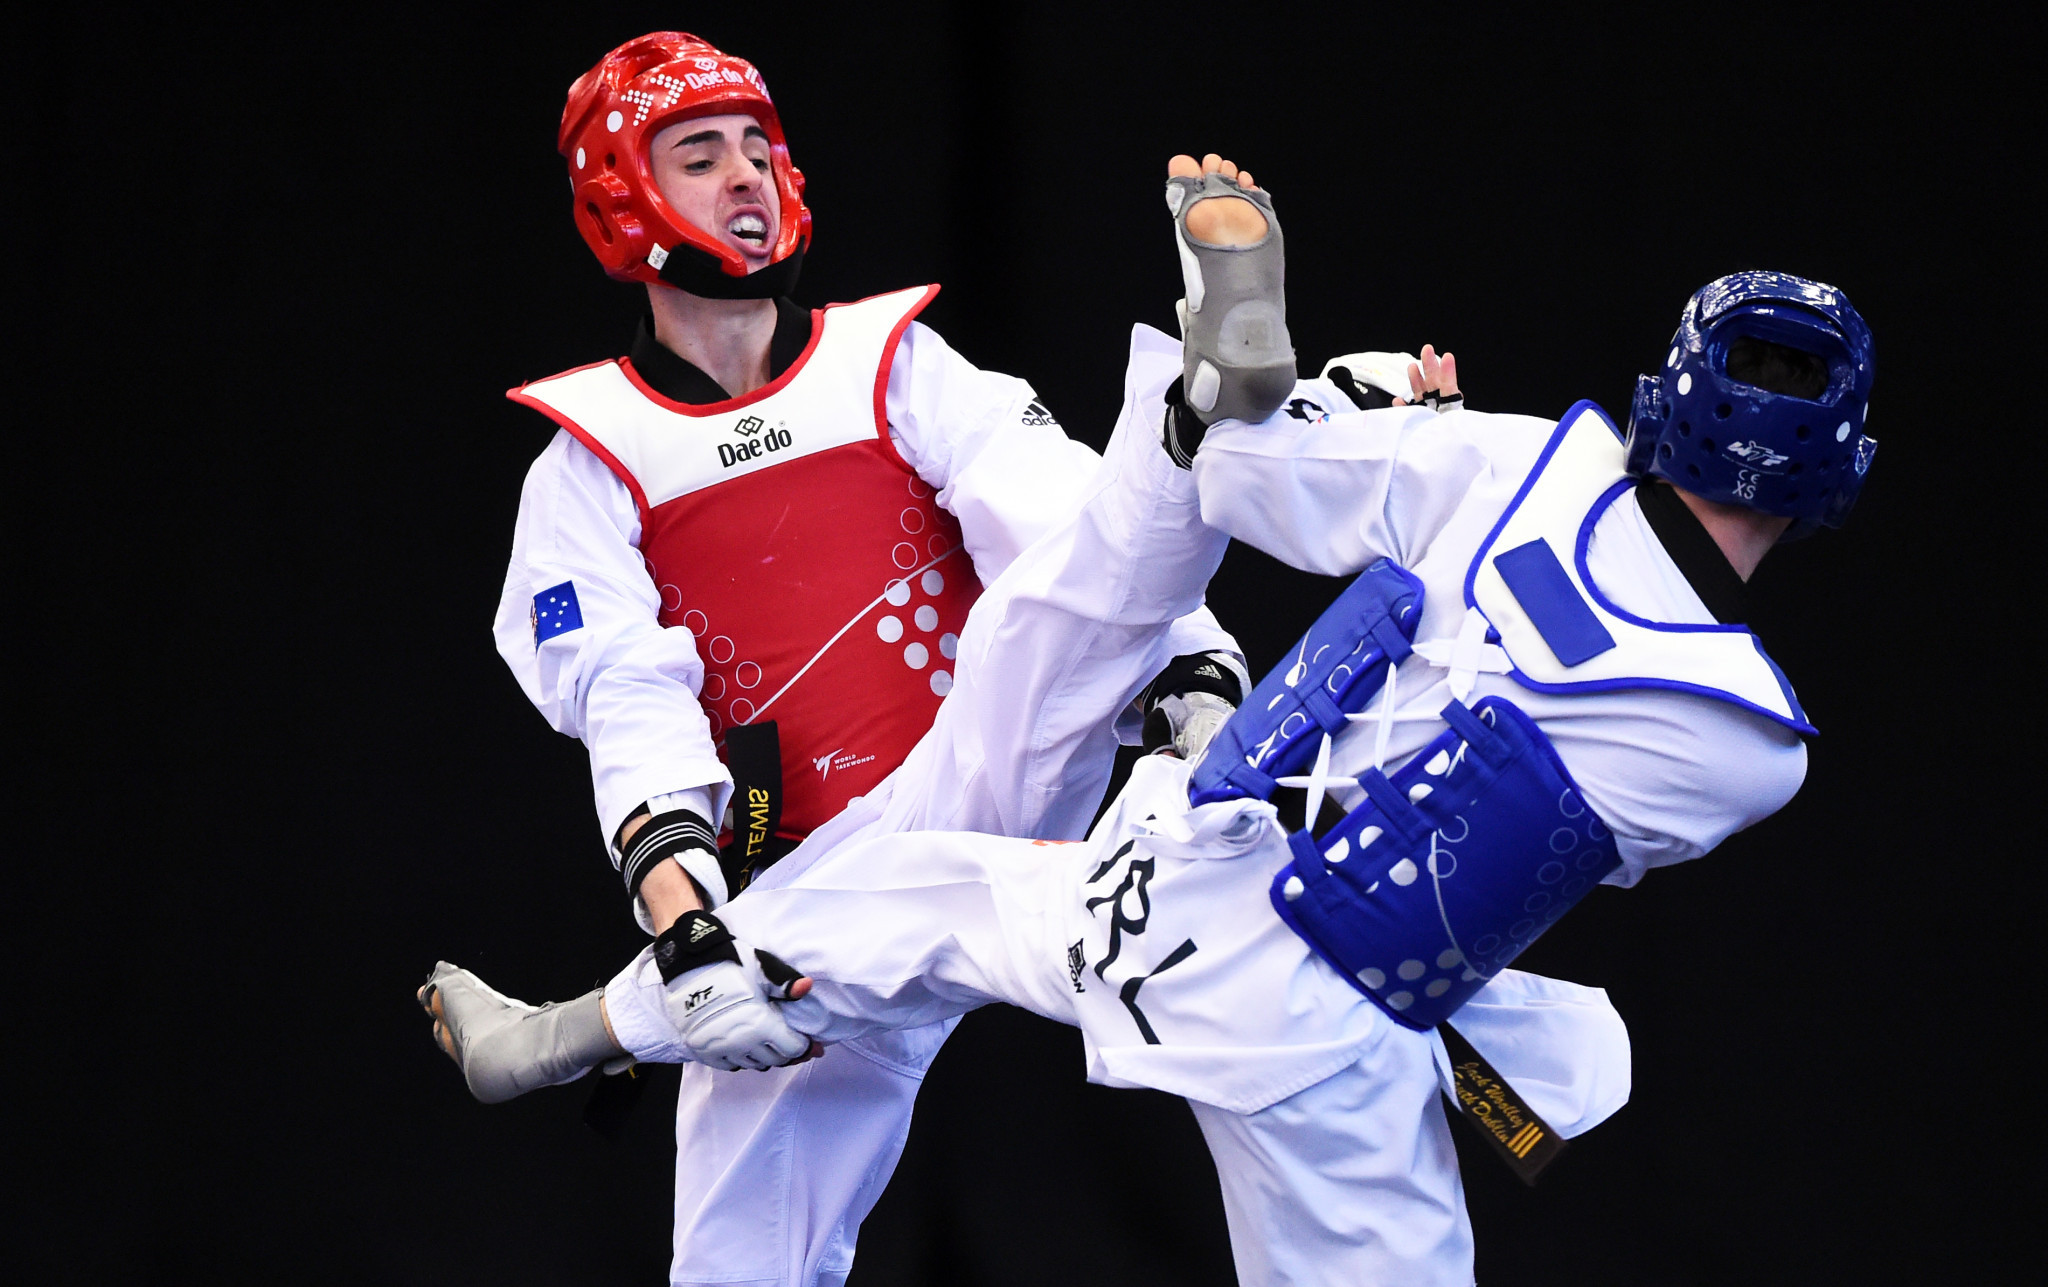 Athletes will be able to use the World Taekwondo President’s Cup in the Gold Coast to prepare for next month’s Oceania Taekwondo Championships in Samoa ©Getty Images